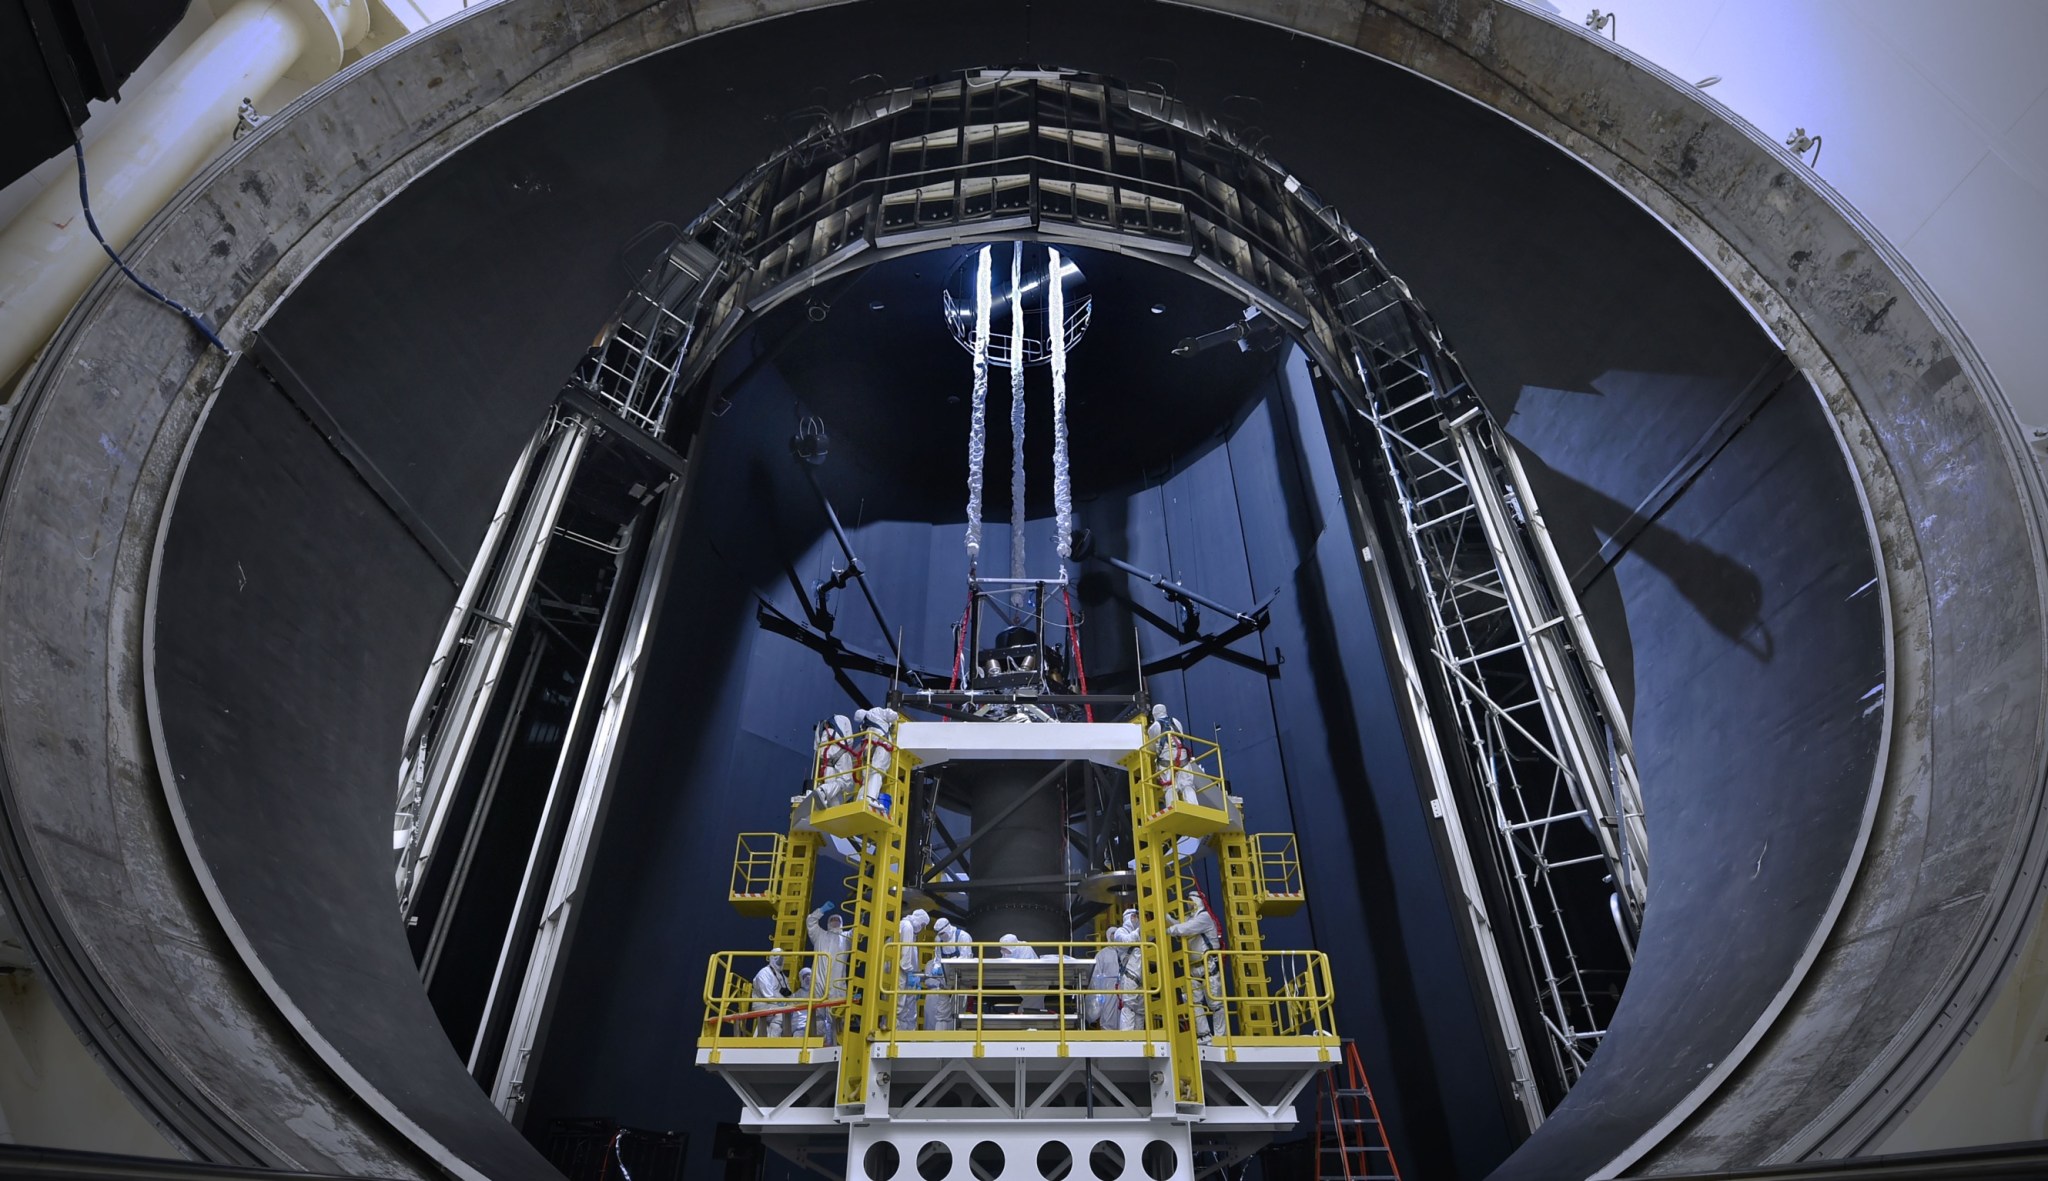 Engineers and technicians, dressed in sterile suits and secured by harnesses to stands for safety, are seen inside Chamber A preparing a lift system that will be used to hold the telescope during testing.